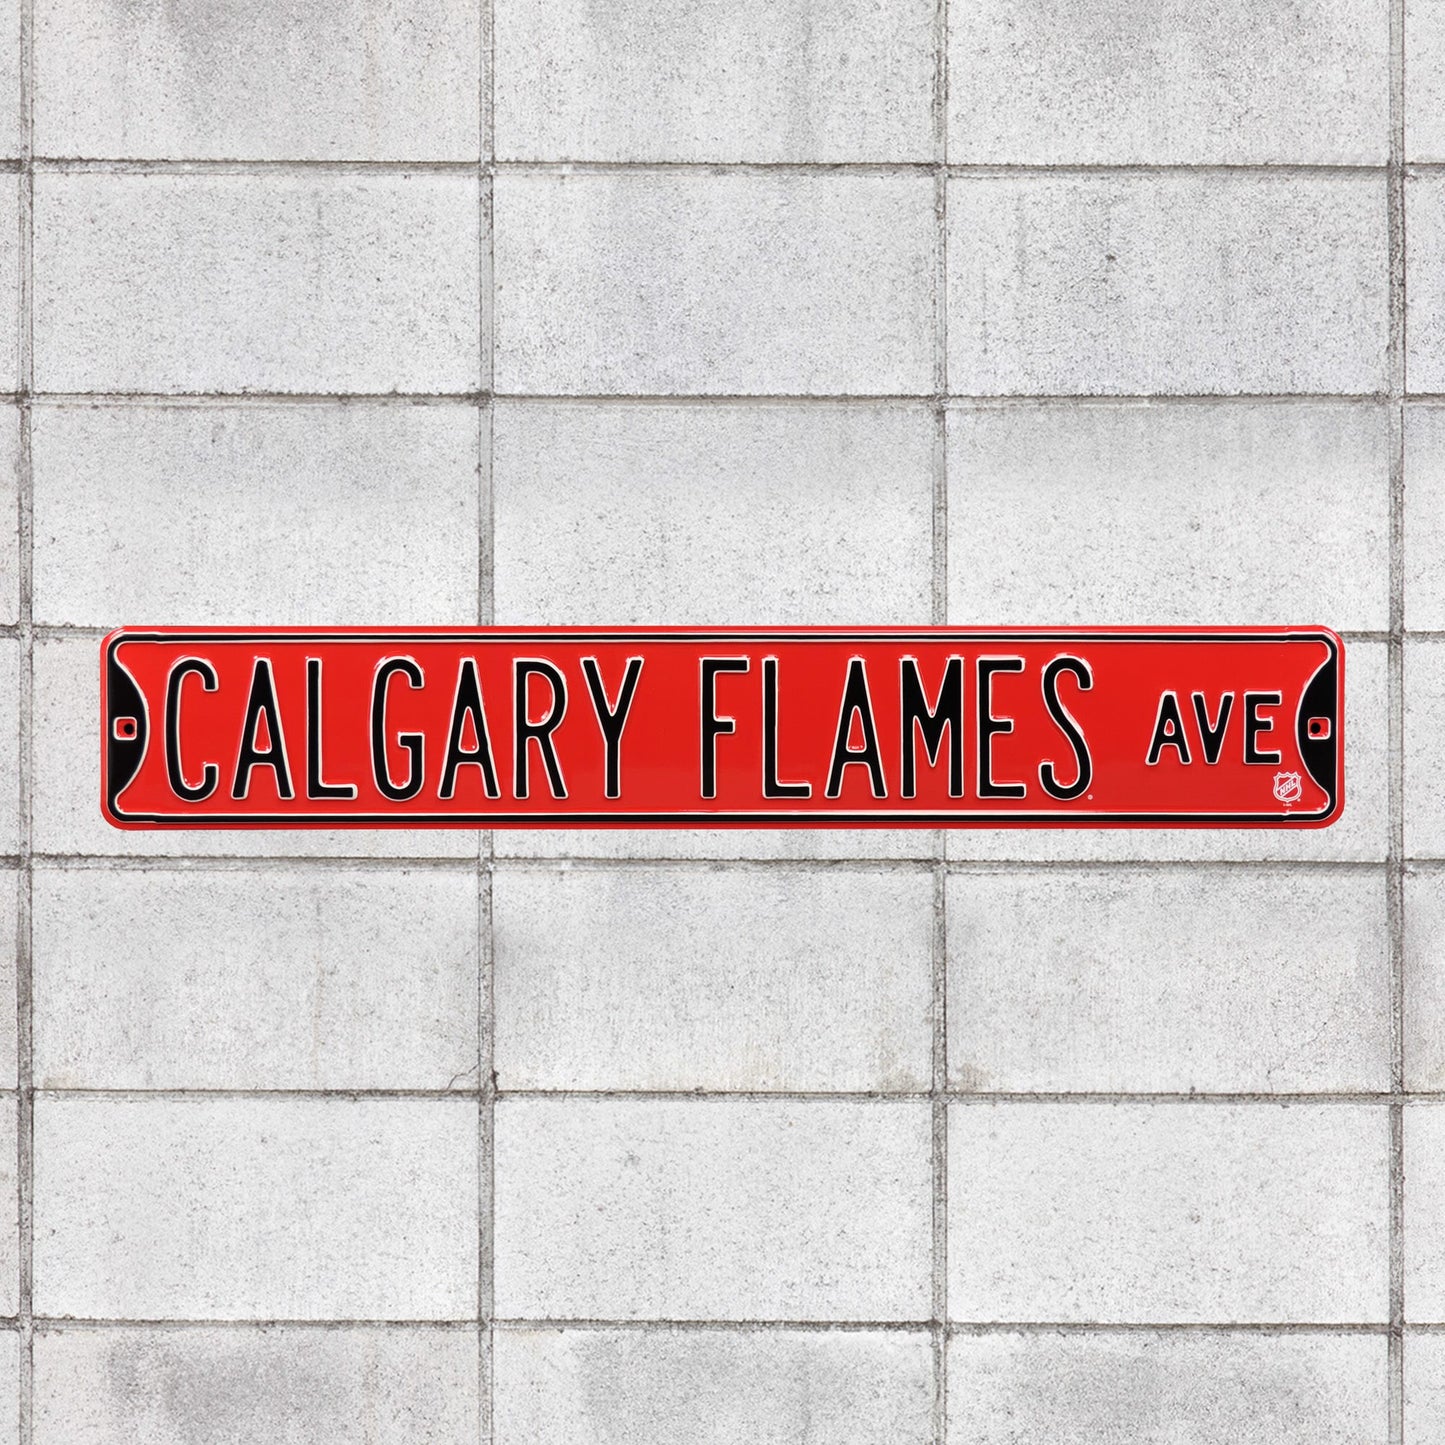 Calgary Flames: Calgary Flames Avenue - Officially Licensed NHL Metal Street Sign